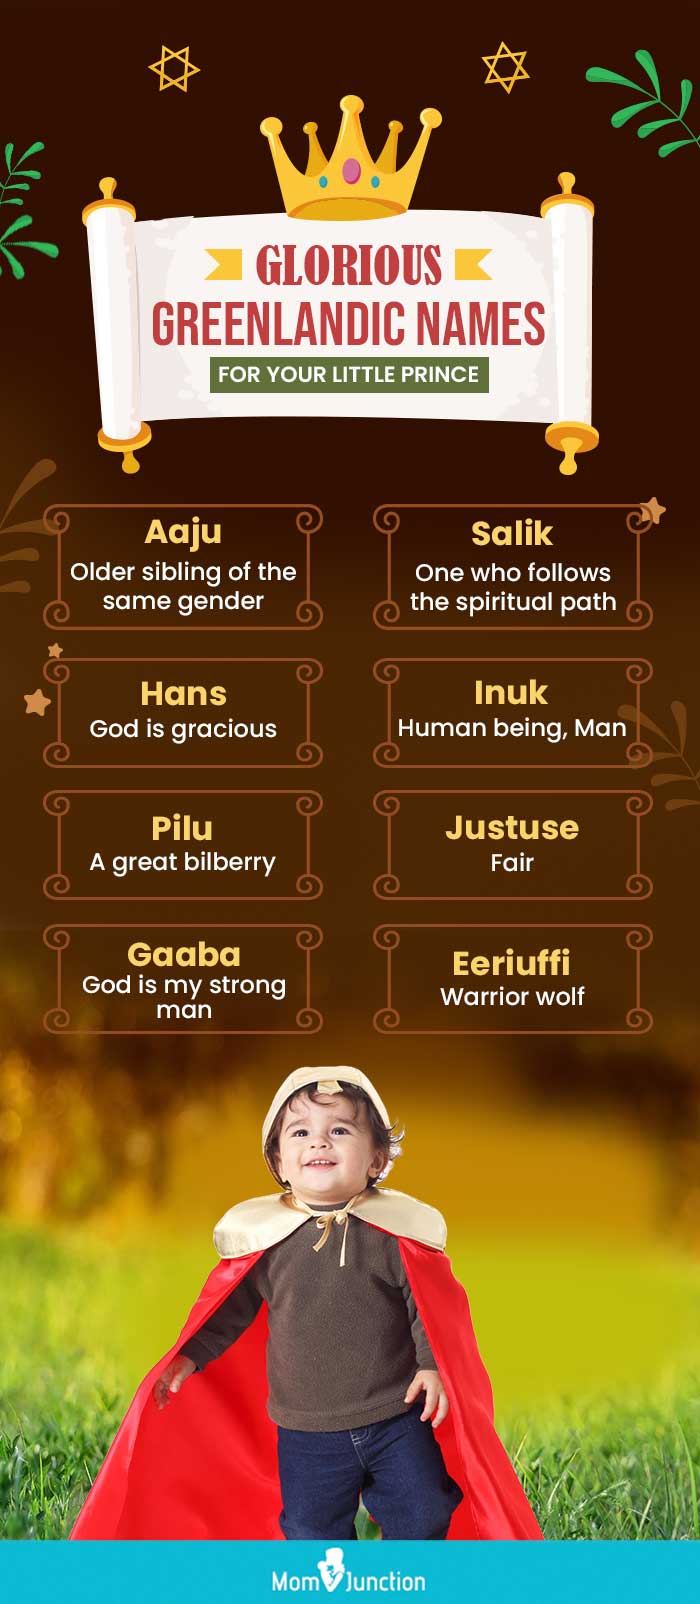 glorious greenlandic names for your little prince (infographic)